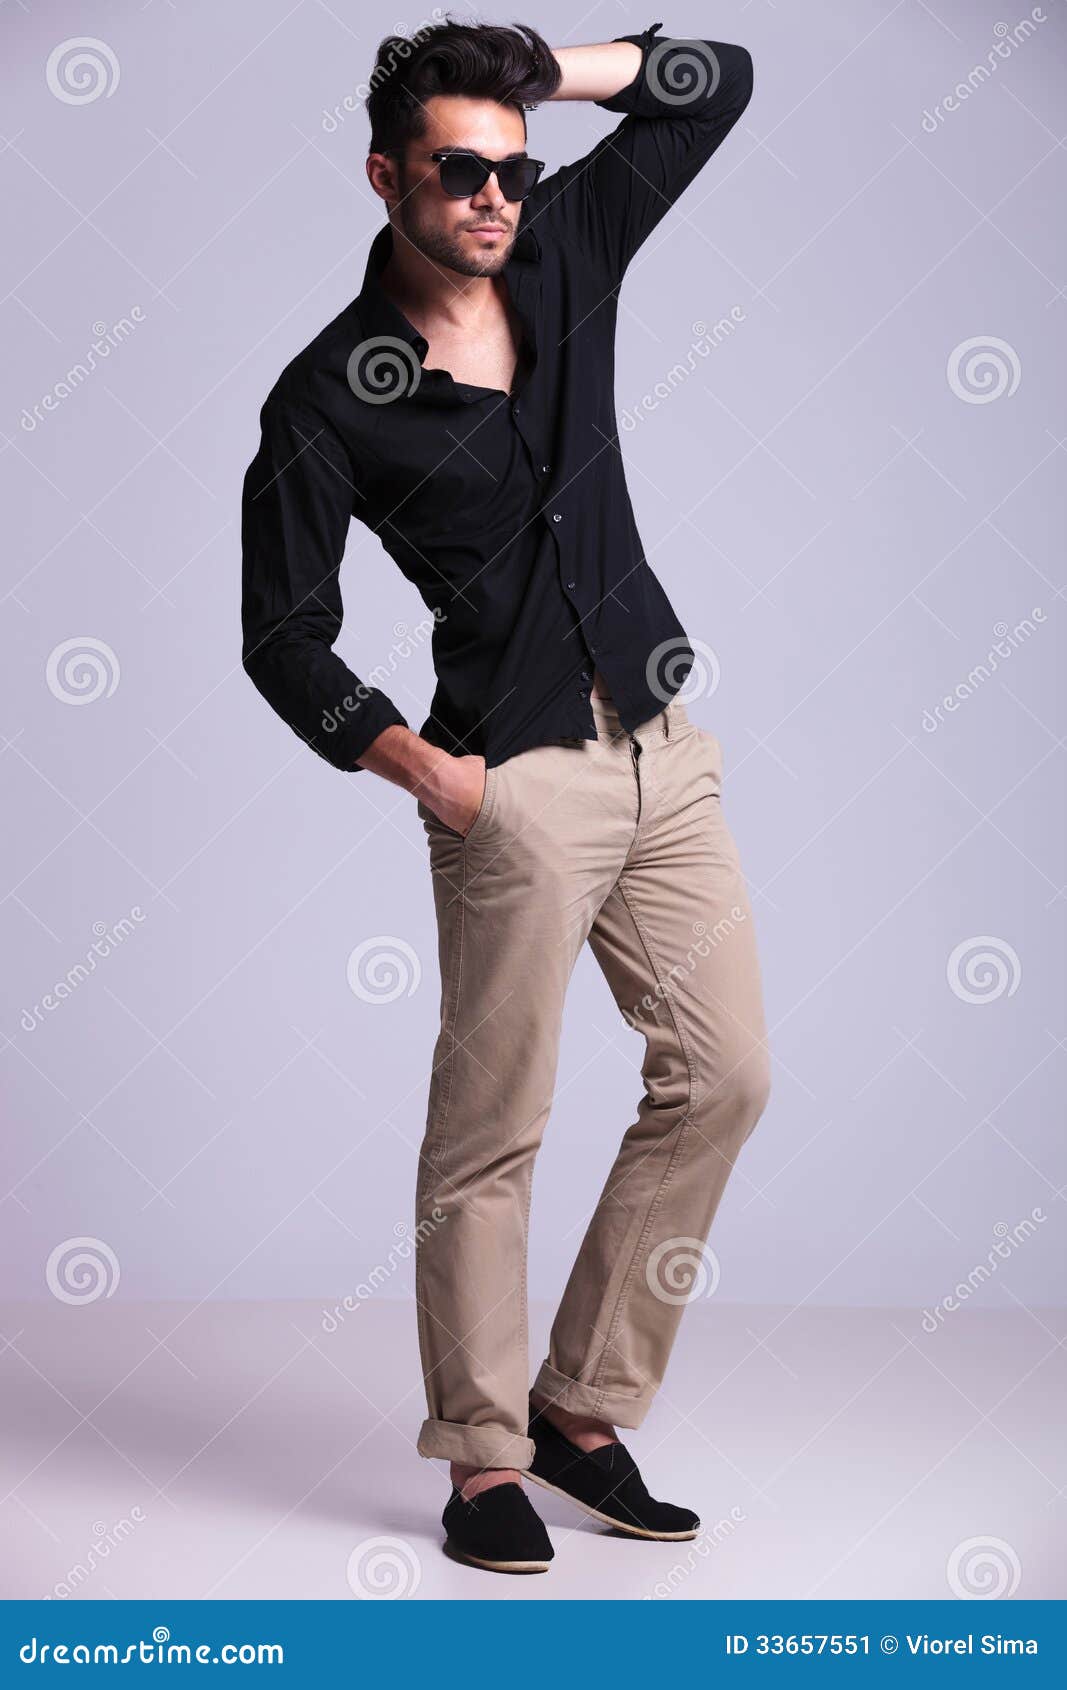 young fashion man poses hand hair full length picture standing his one his pocket looking away 33657551